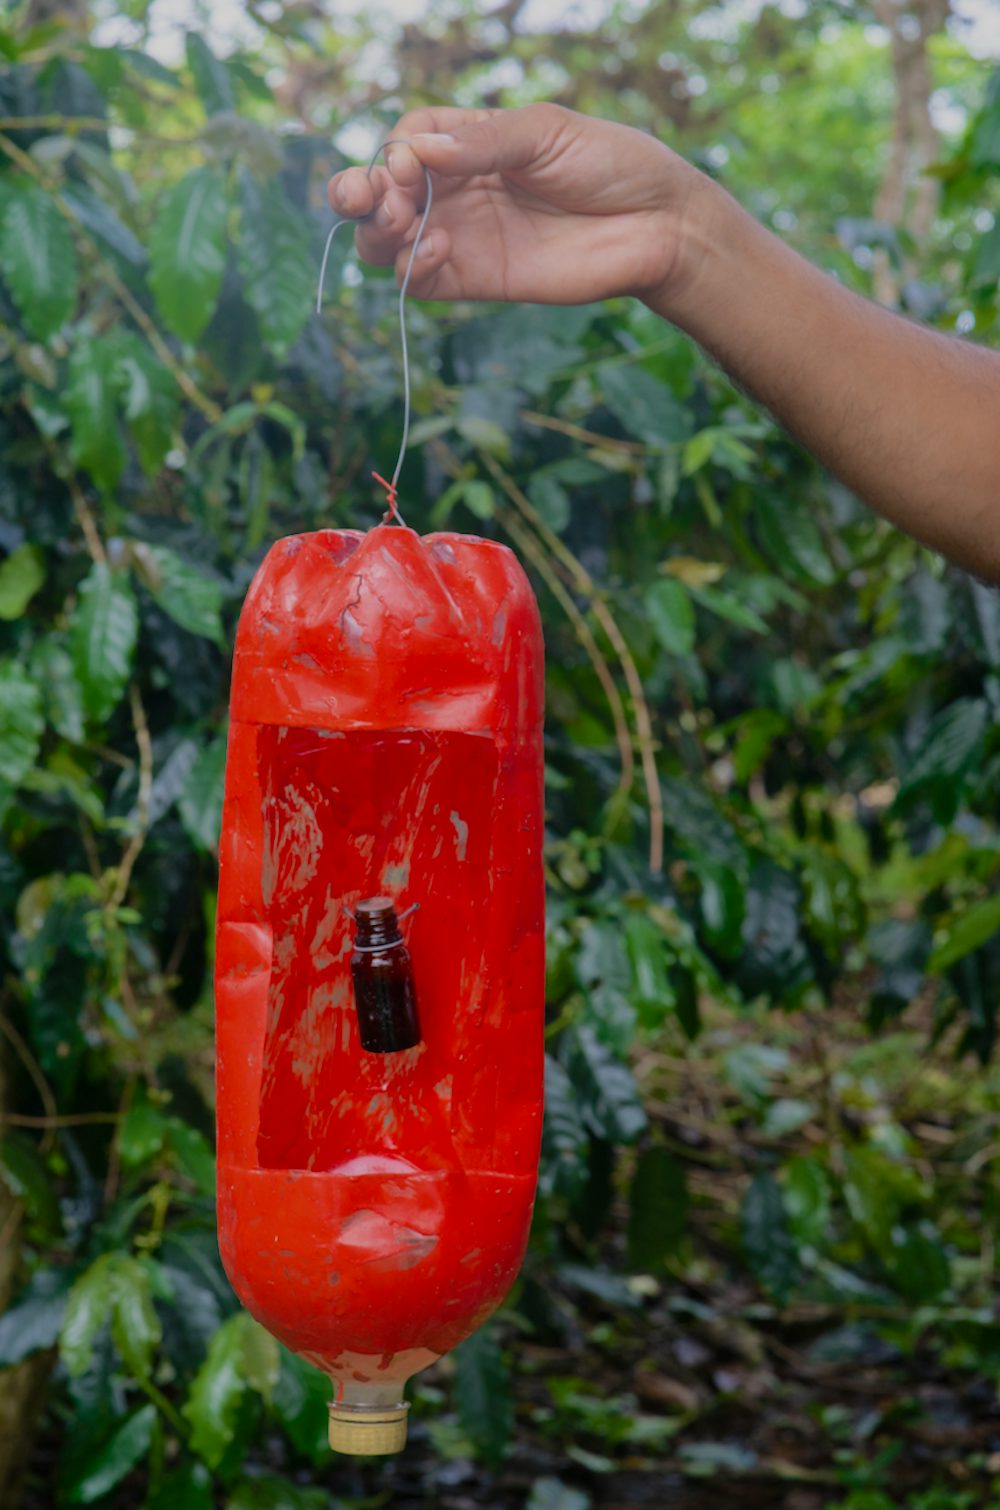 A person holds up a red plastic bottle with a hole cut in it to attract and kill pests.